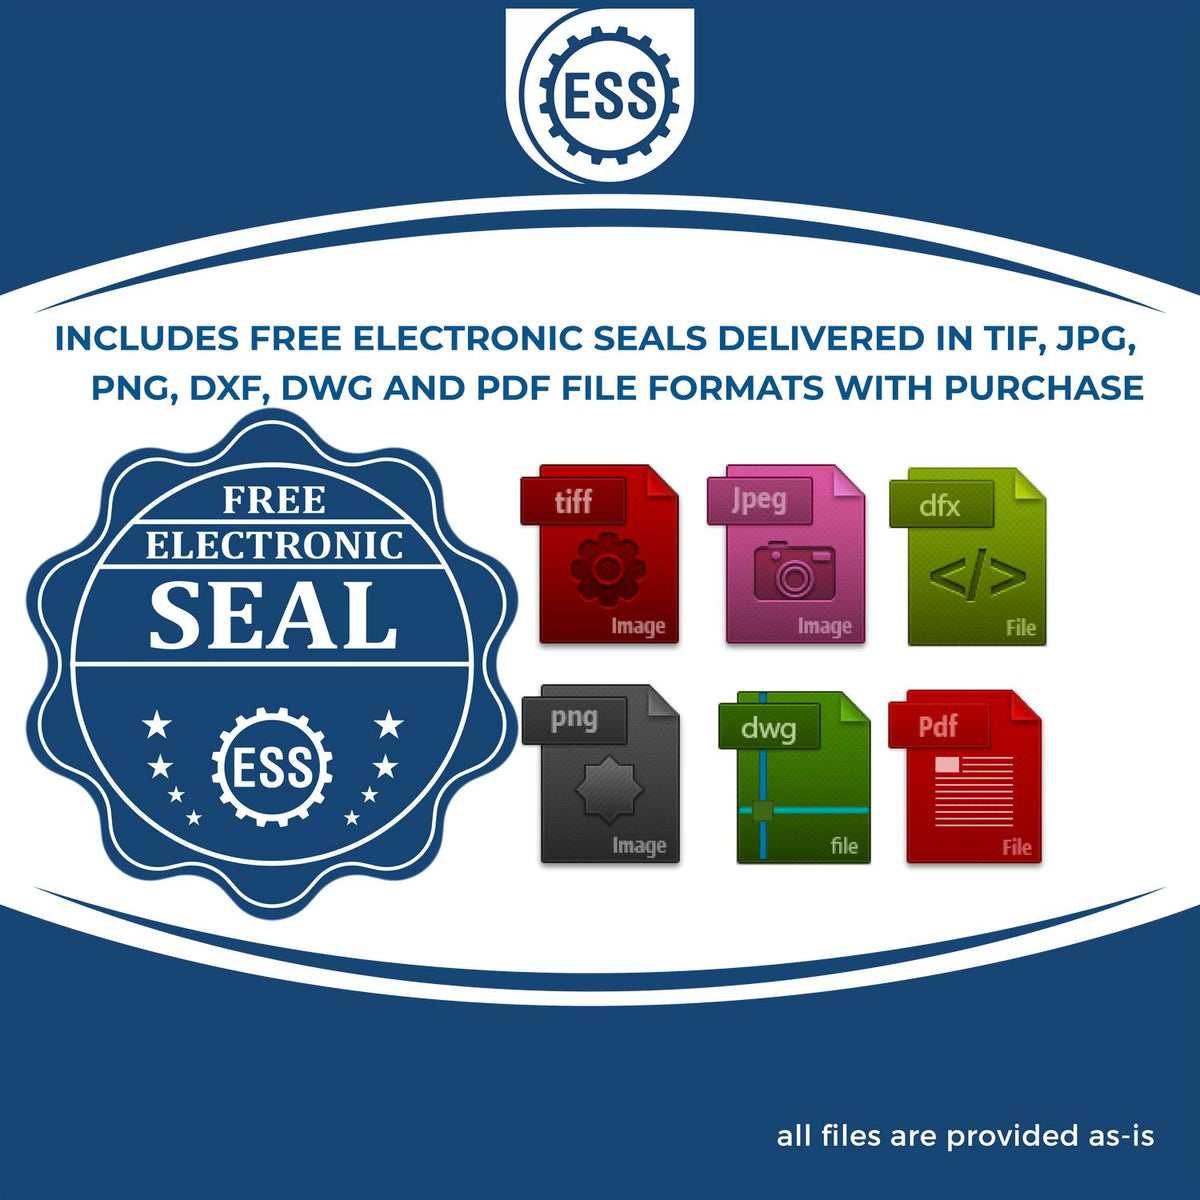 An infographic for the free electronic seal for the State of New Mexico Long Reach Architectural Embossing Seal illustrating the different file type icons such as DXF, DWG, TIF, JPG and PNG.